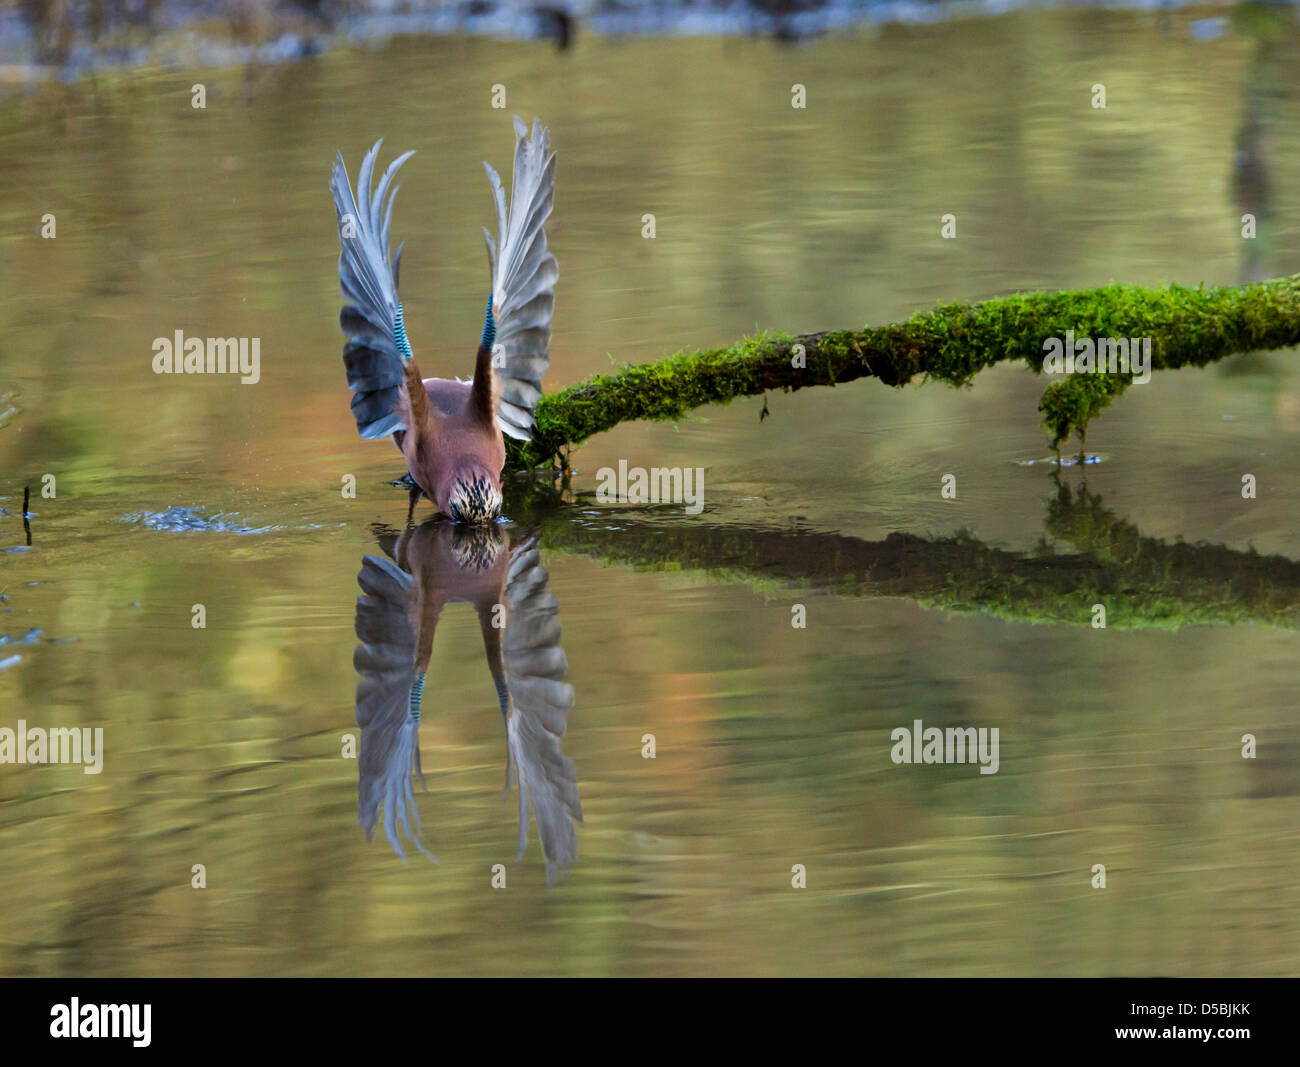 Garrulus glandarius. Eurasian Jay perched on a branch, wings extended and reflected in the pool below. Stock Photo